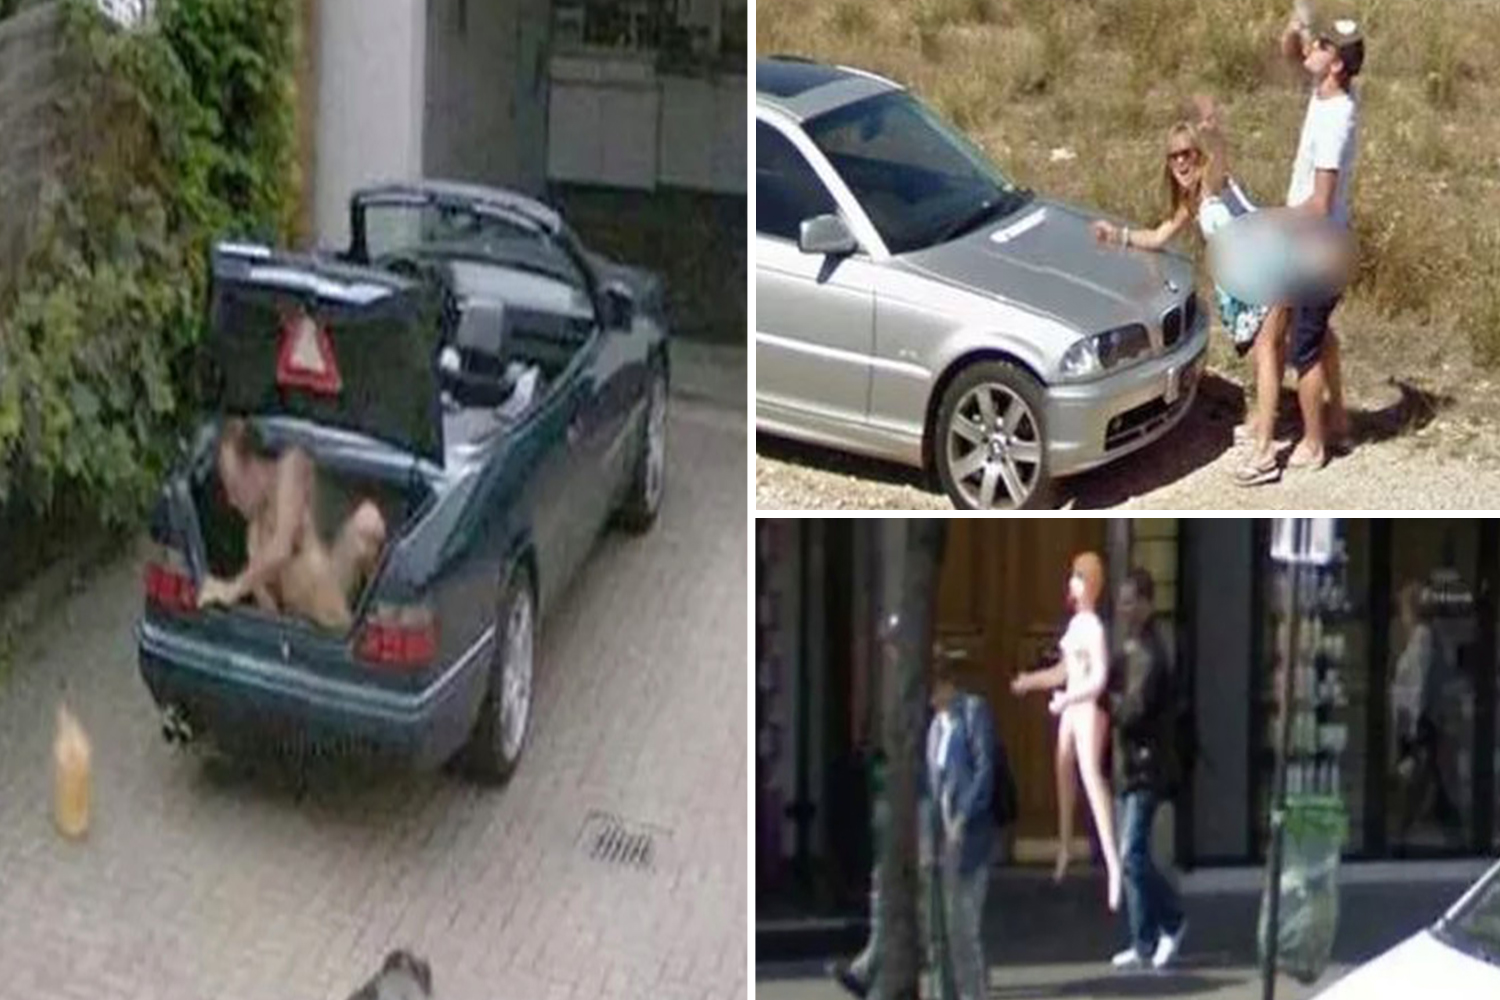 anthony barbuto recommends google earth naked people pic